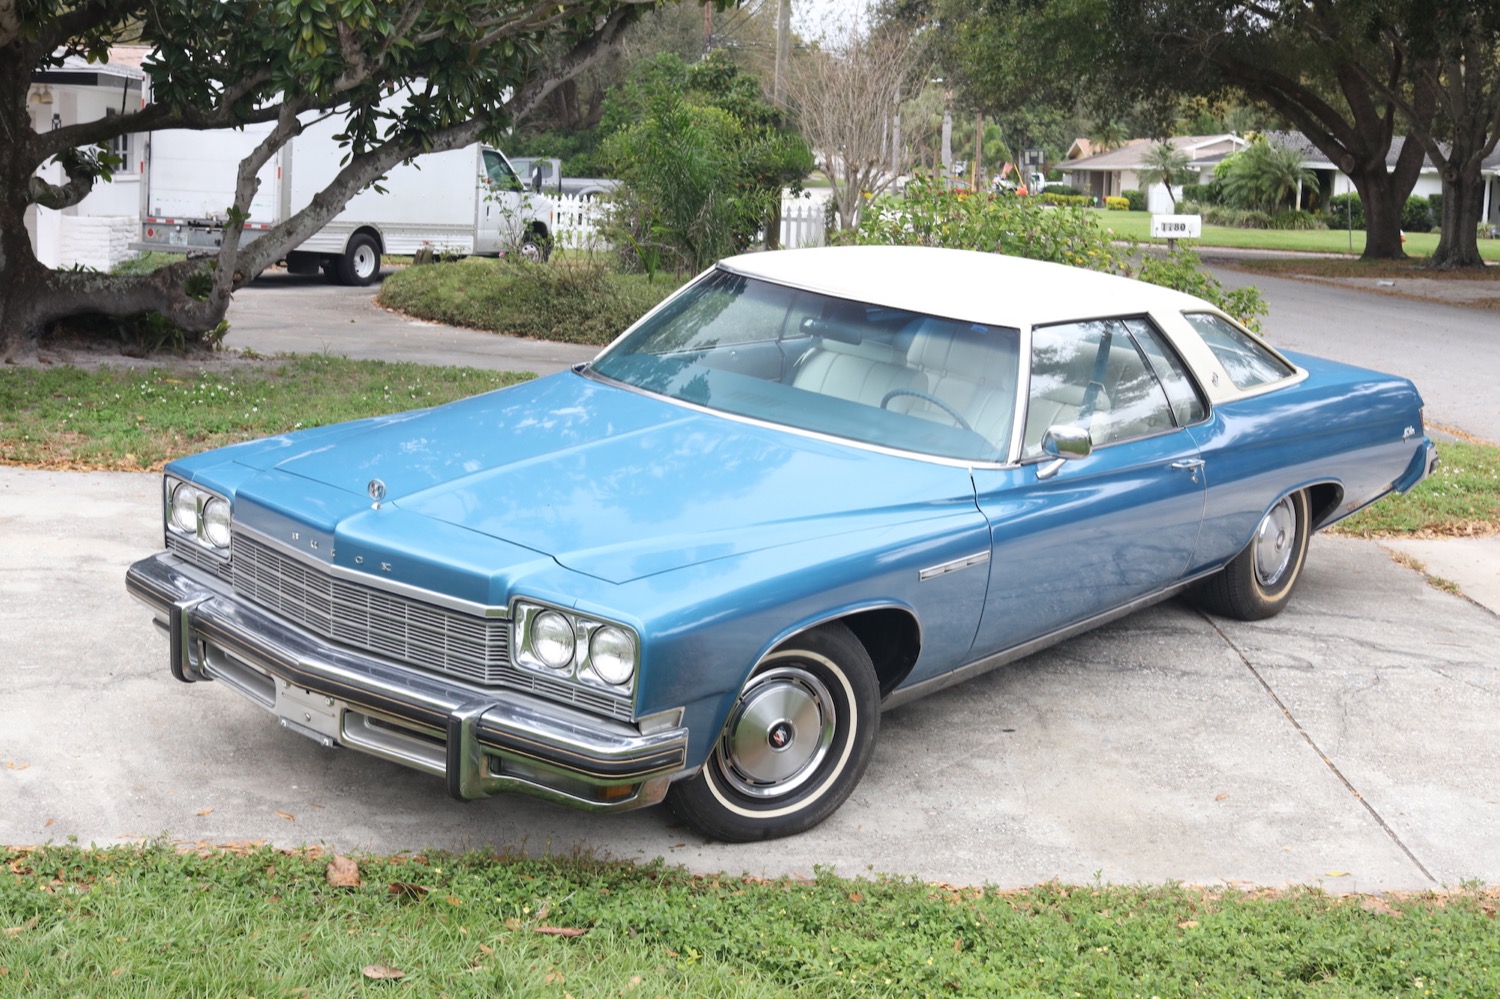 Well-Preserved 1975 Buick LeSabre Custom For Sale | GM Authority